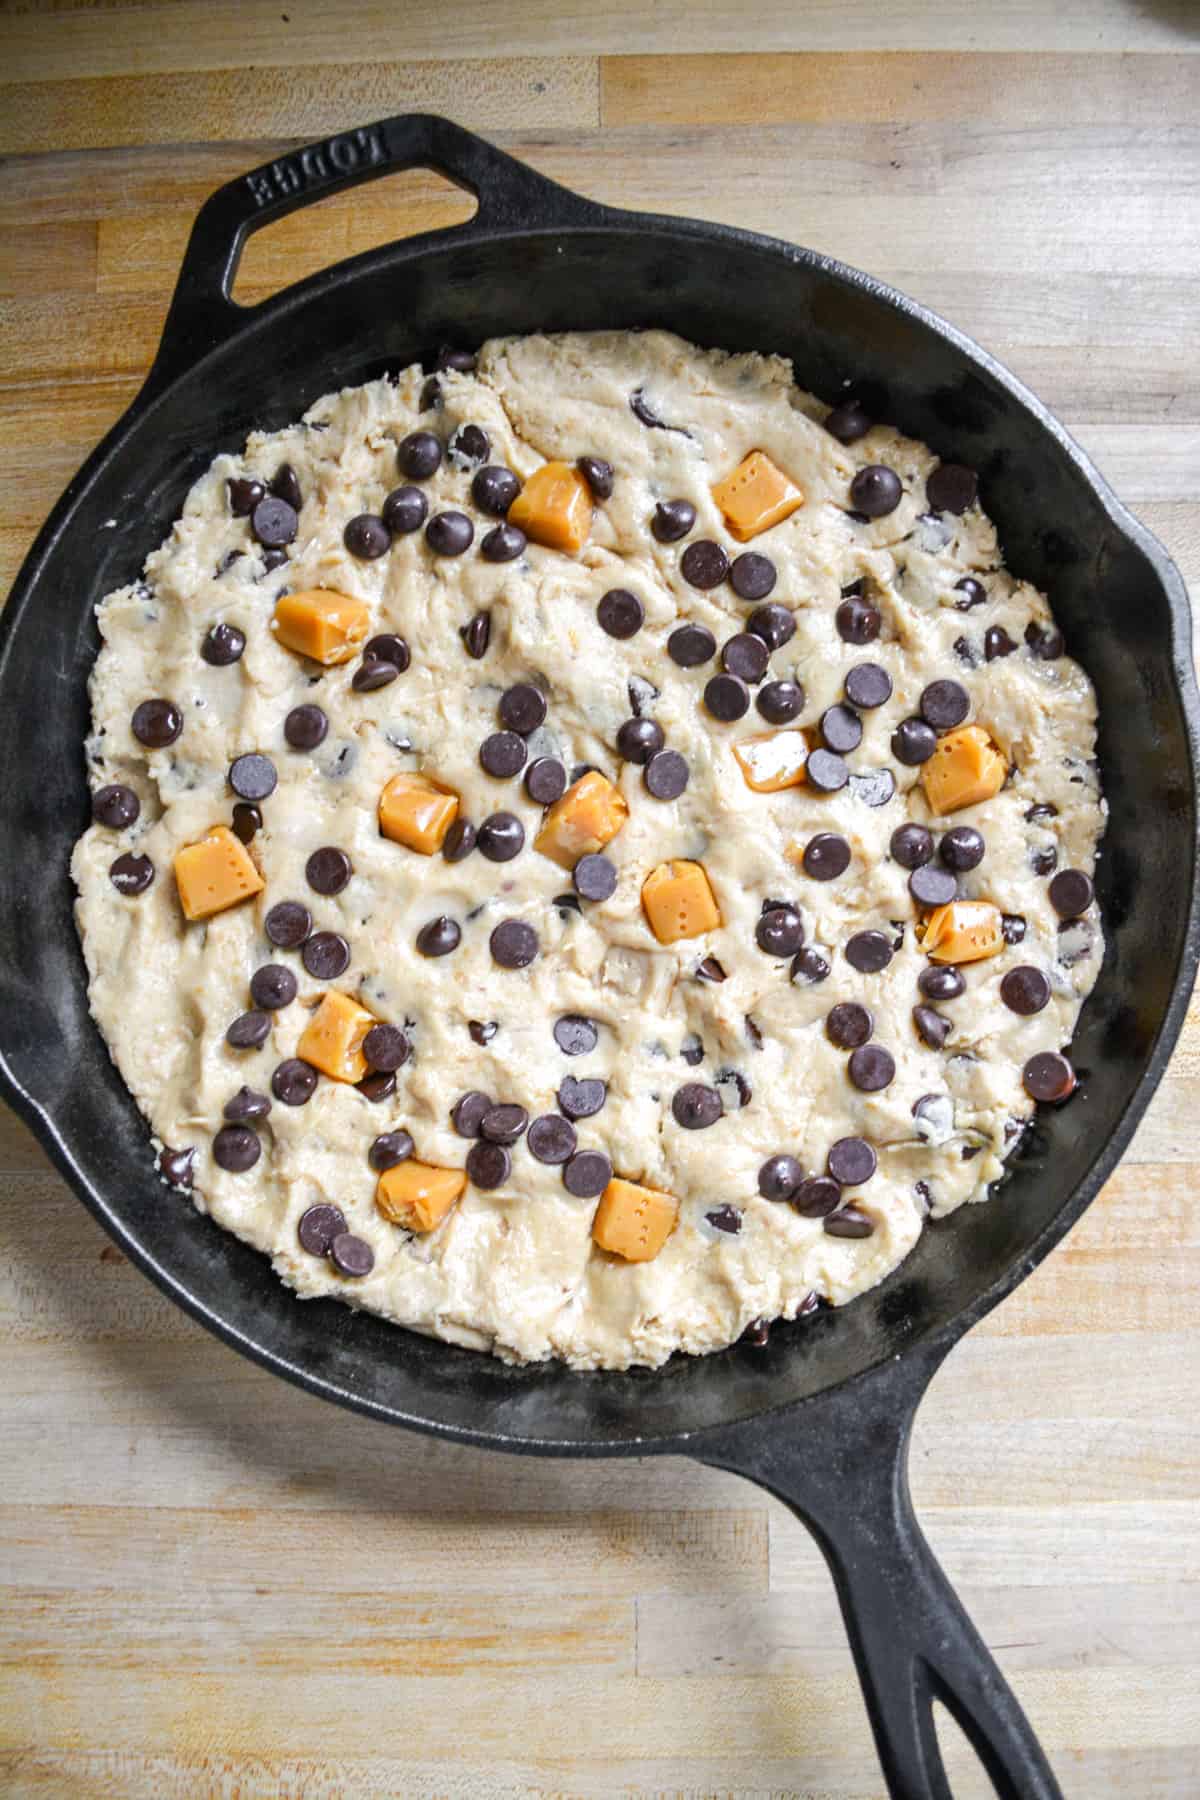 A black cast iron skillet with cookie dough pressed into it topped with chocolate chips and salted caramel candies.